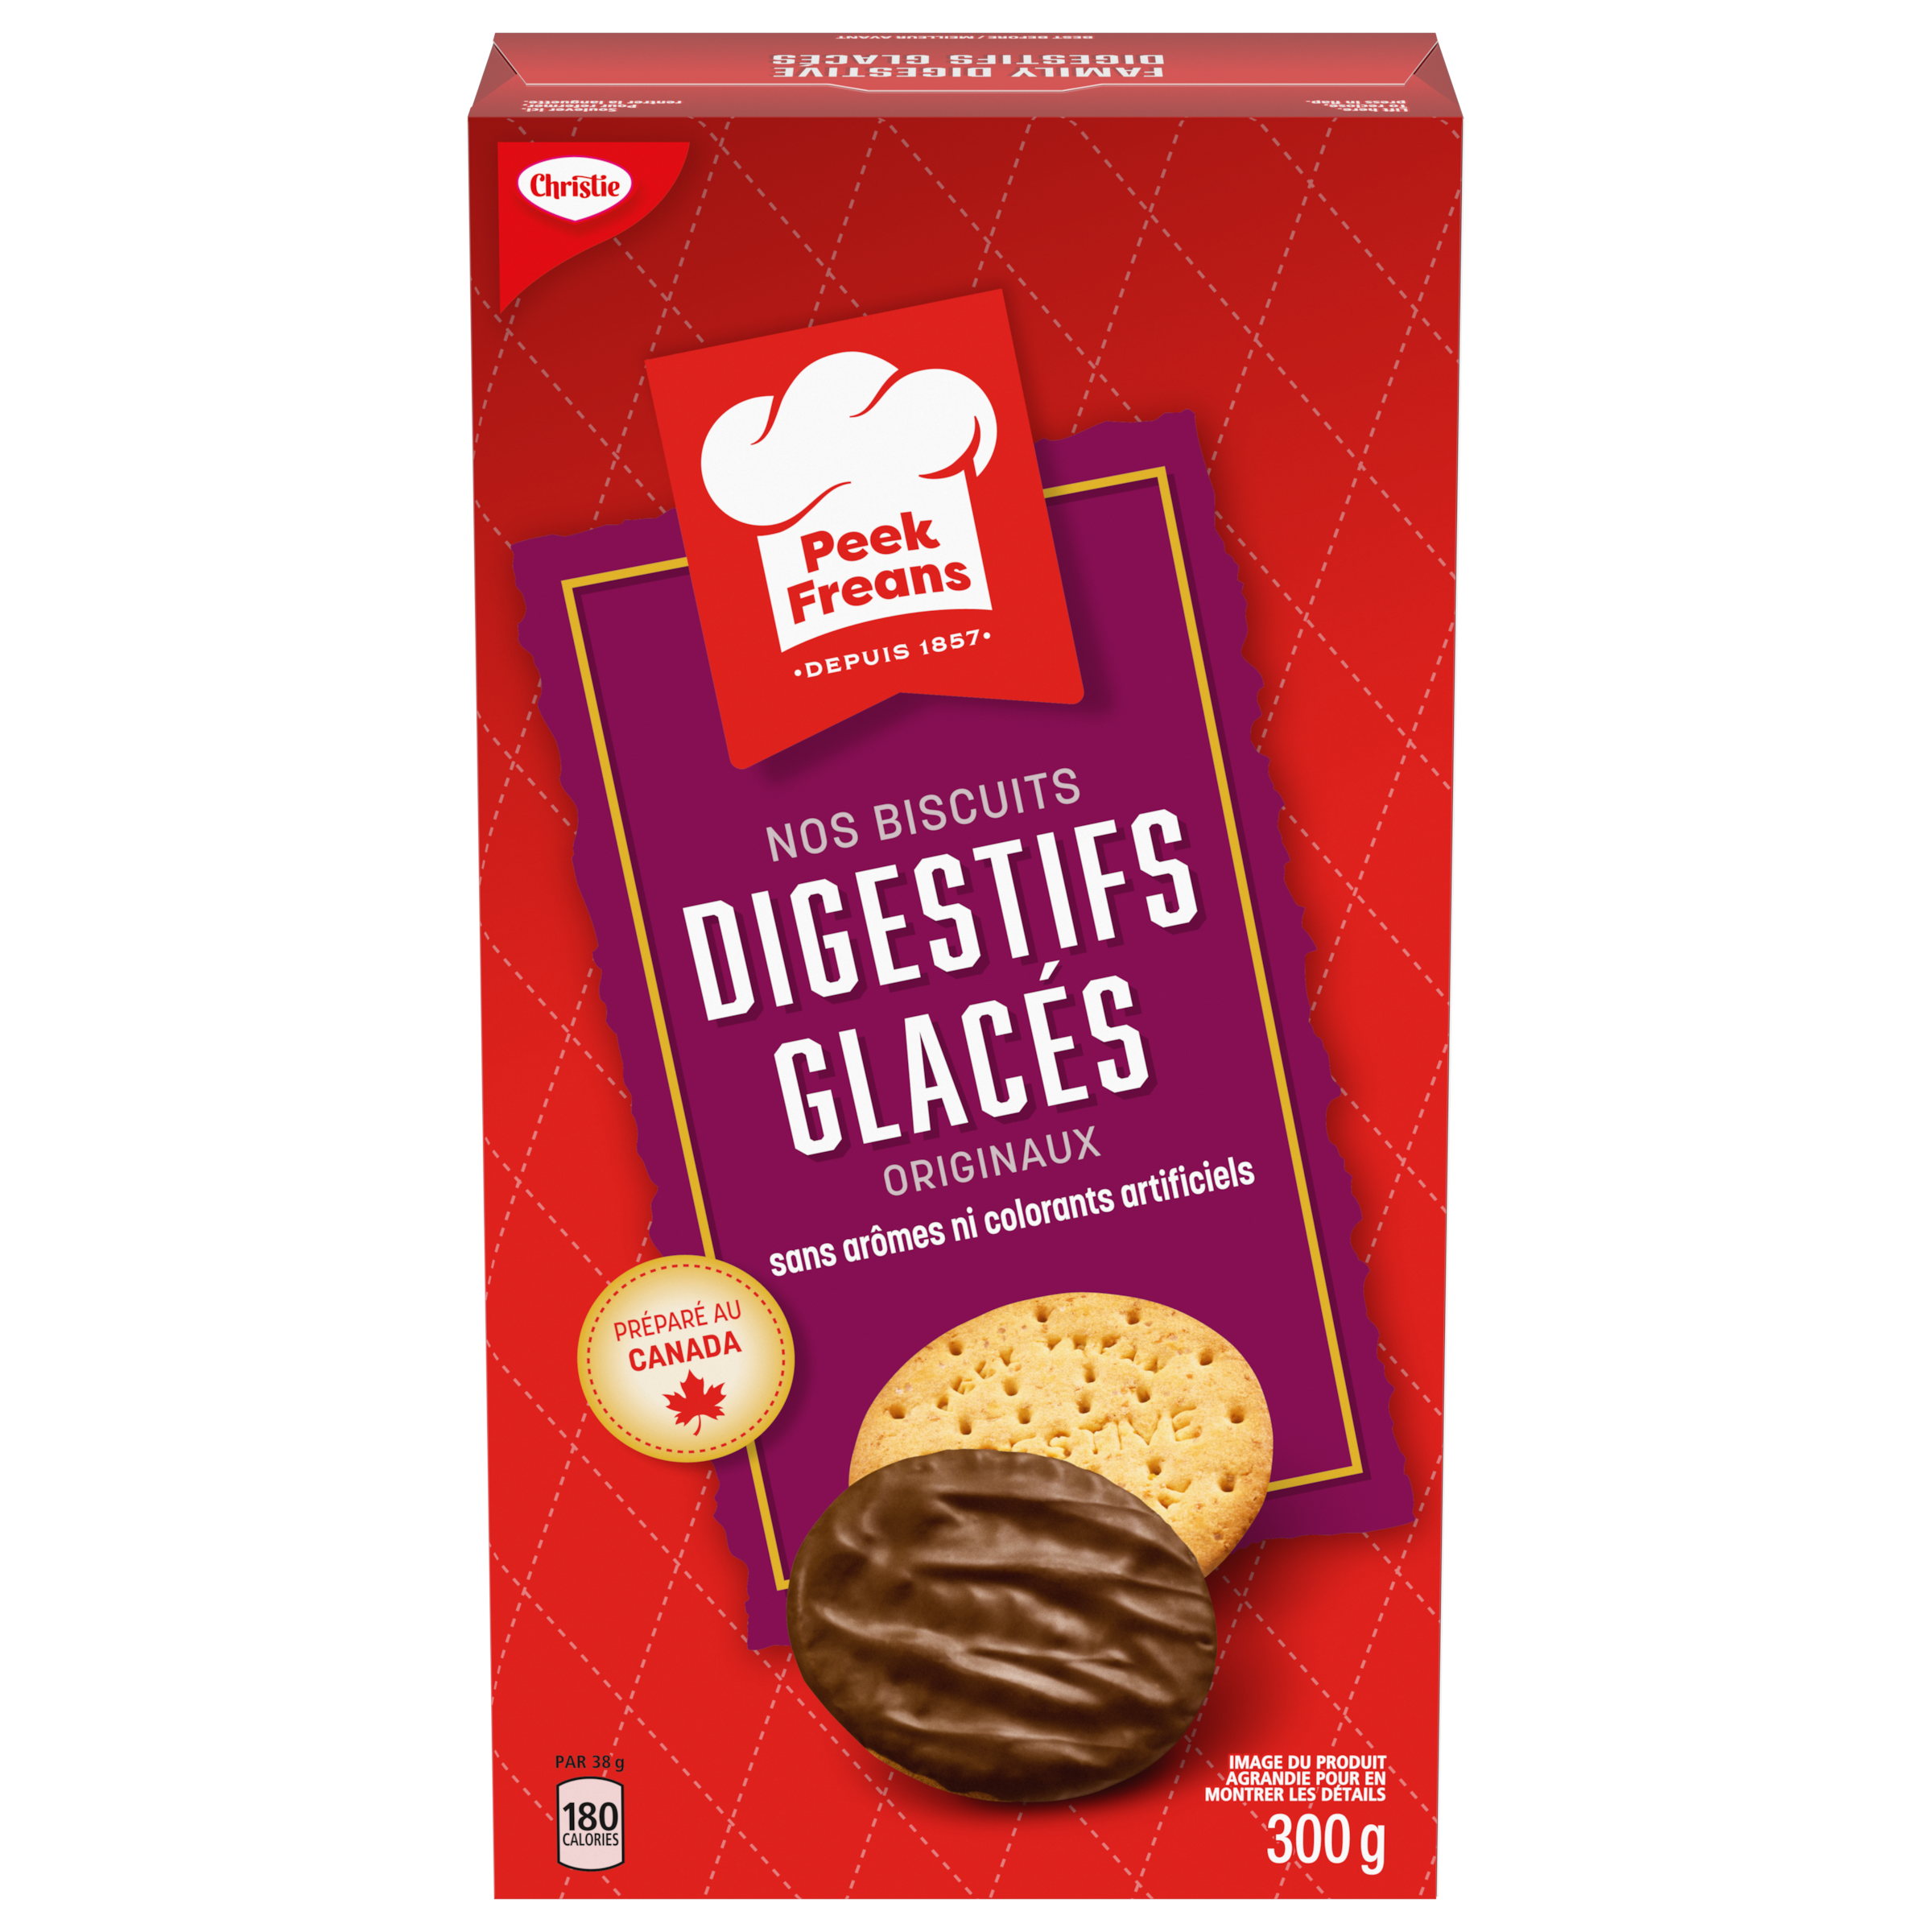 Peek Freans Family Digestive Biscuit, 300g -0